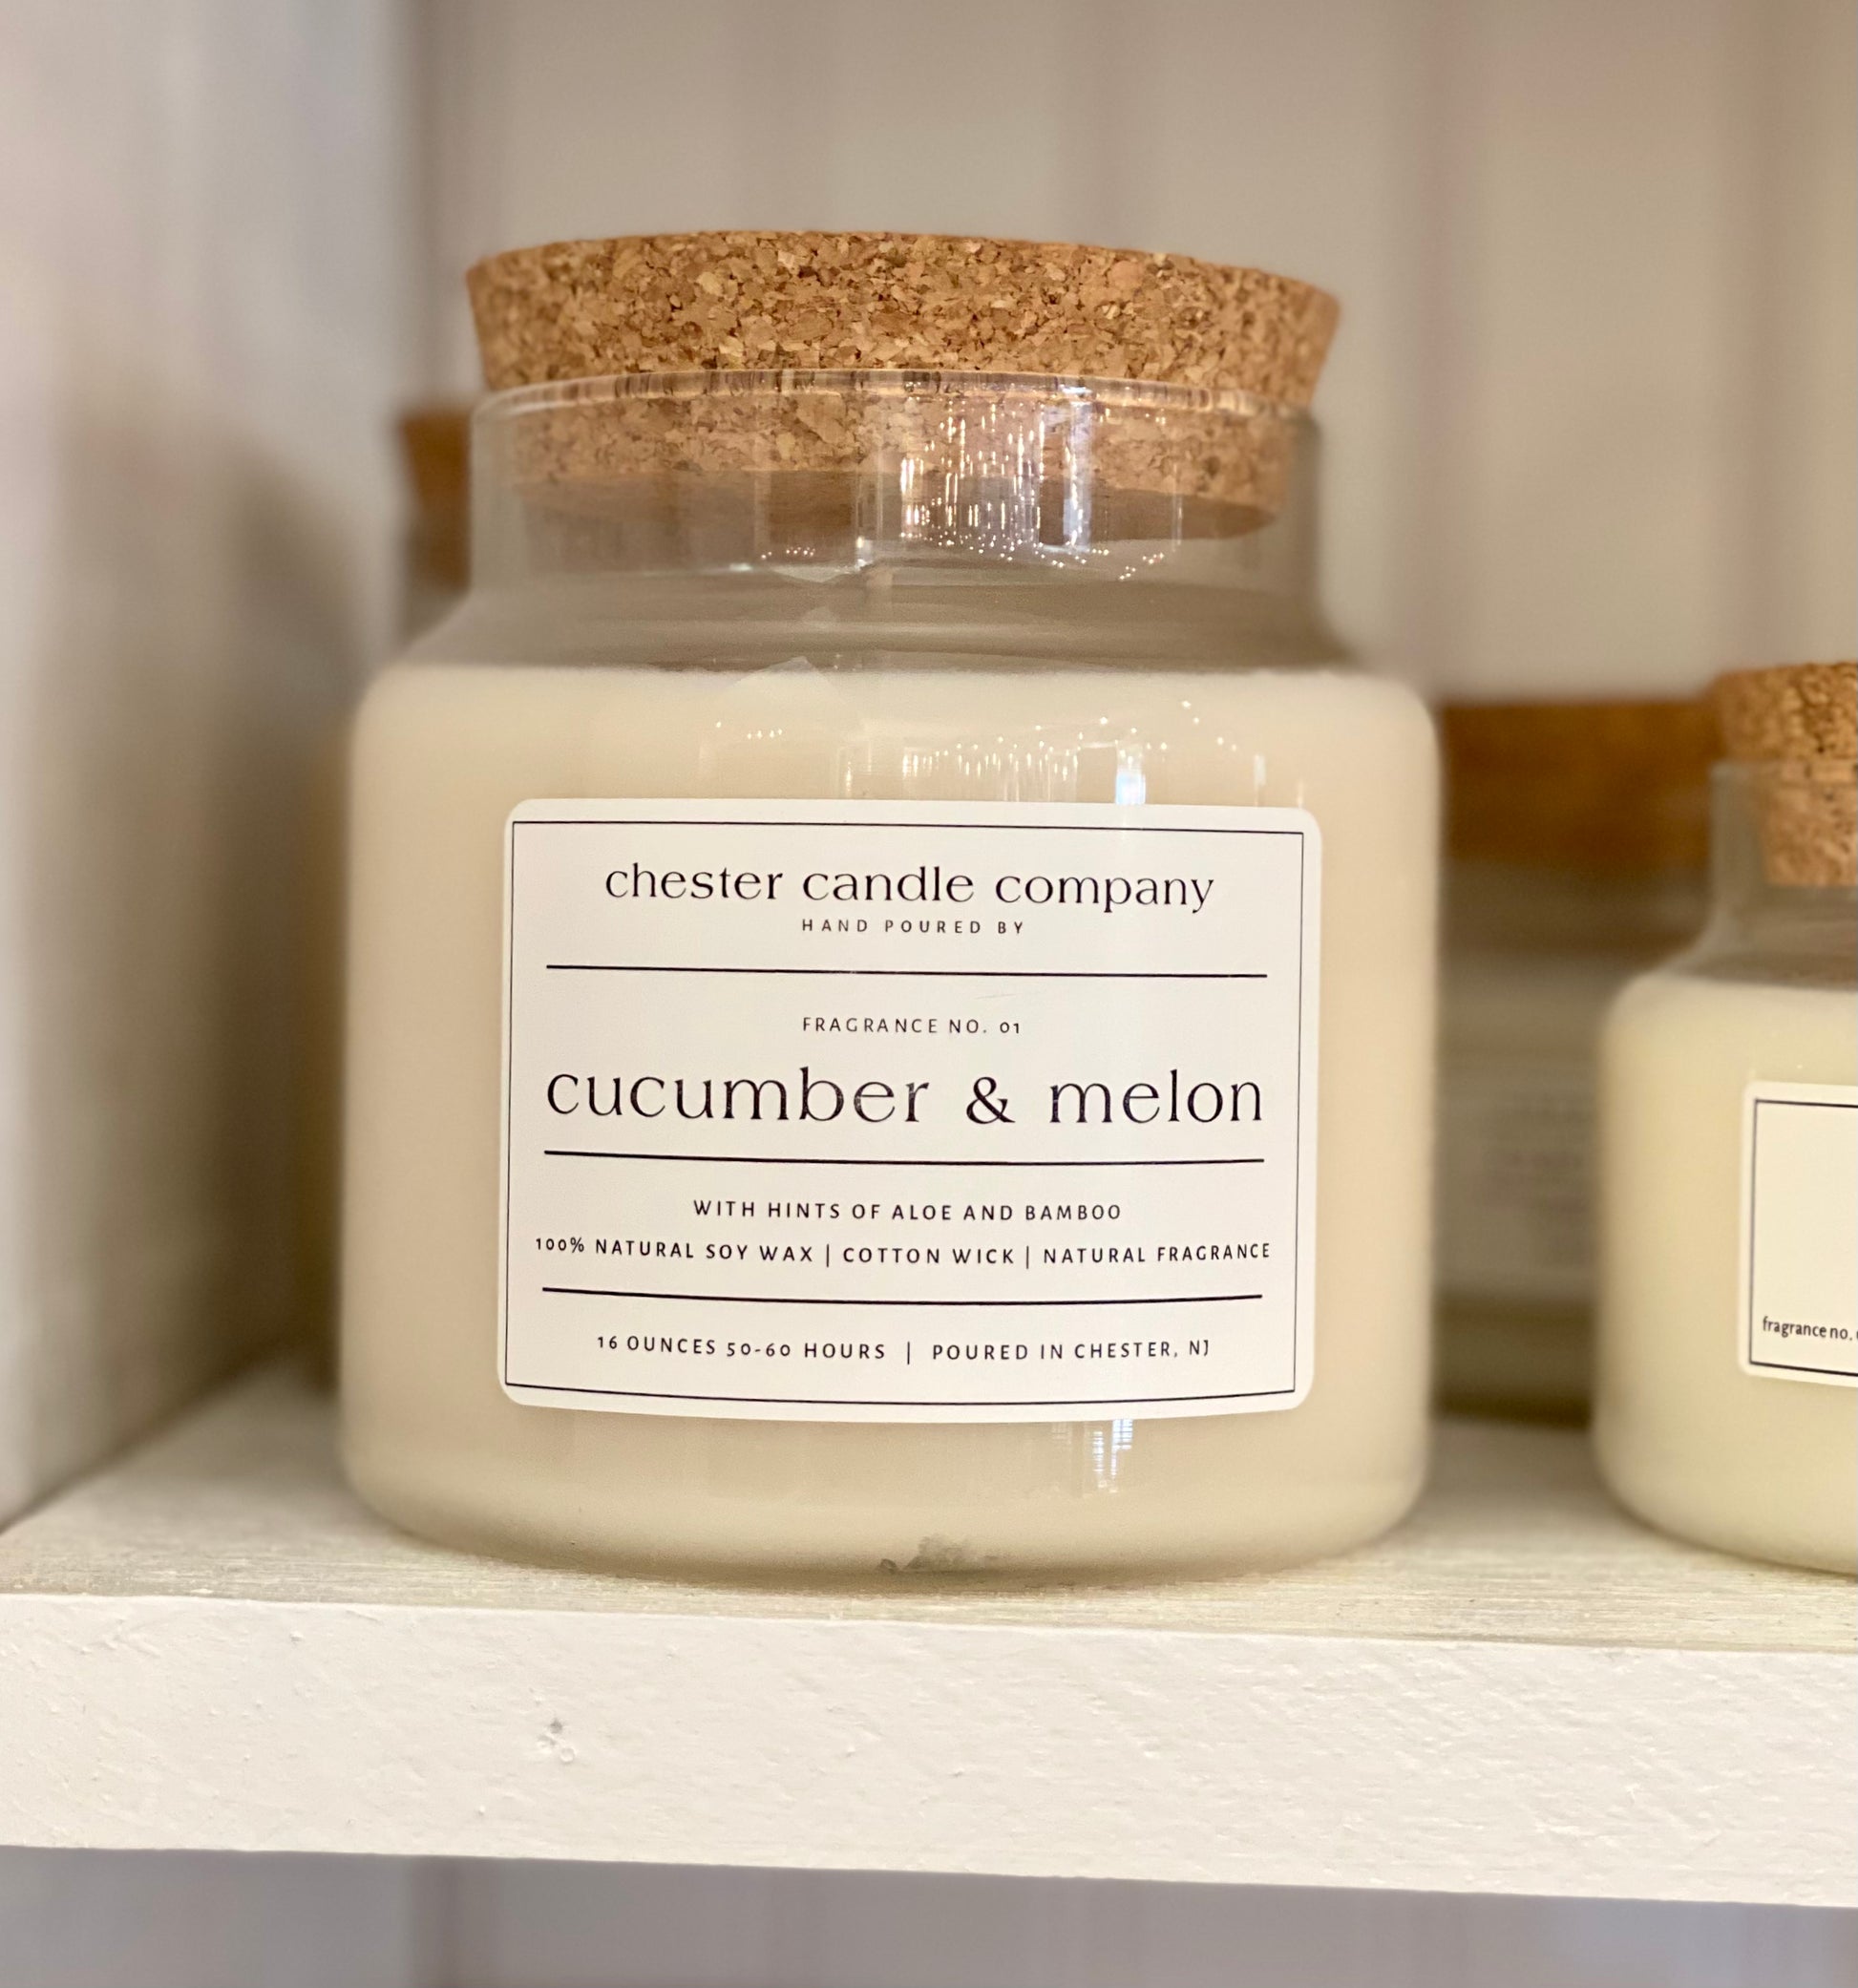 Natural Soy Wax Candle in a Clear Glass Apothecary-Style Jar and a Cork Lid. White Label on the Jar Reads "chester candle company. Fragrance No. 01. cucumber & melon with hints of aloe and bamboo. 100% Natural Soy Wax, Cotton Wick, Natural Fragrance. 16 ounces 50-60 hours. Poured in Chester, NJ”